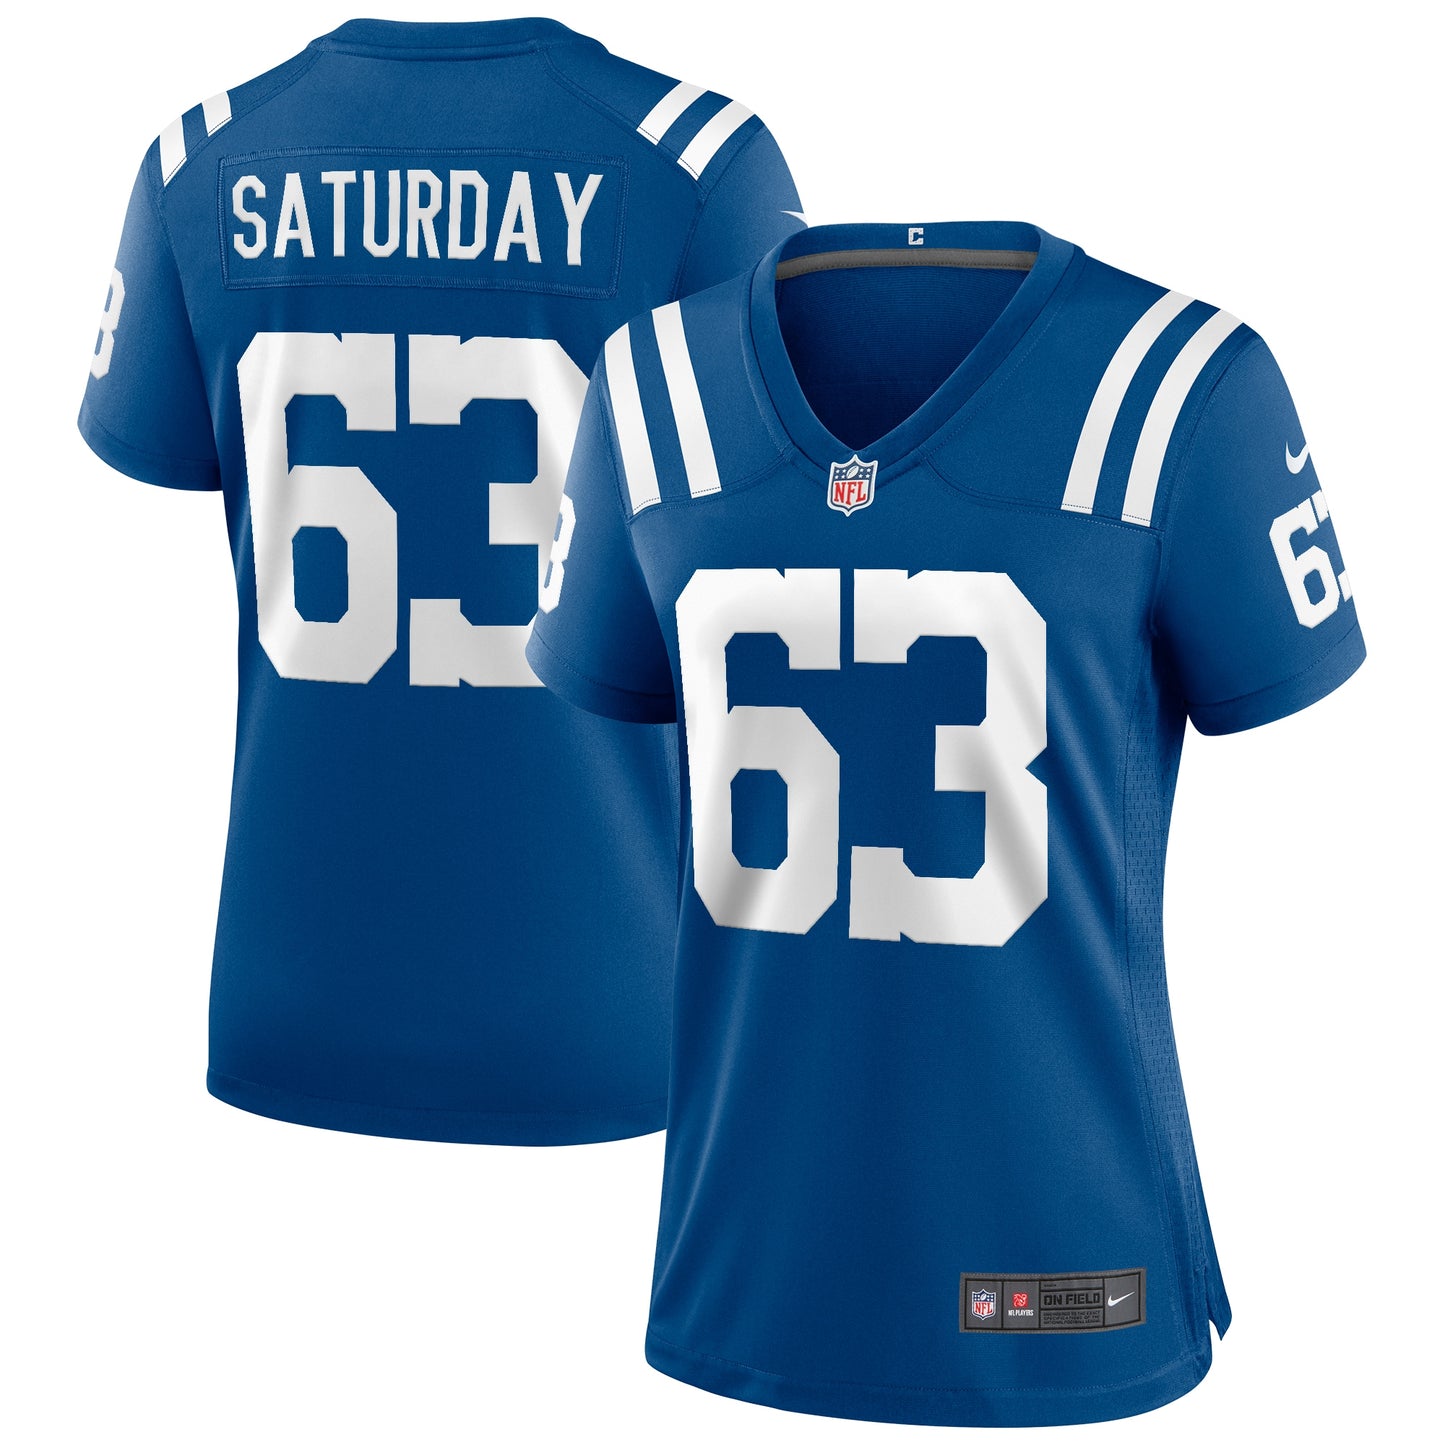 Jeff Saturday Indianapolis Colts Nike Women's Game Retired Player Jersey - Royal